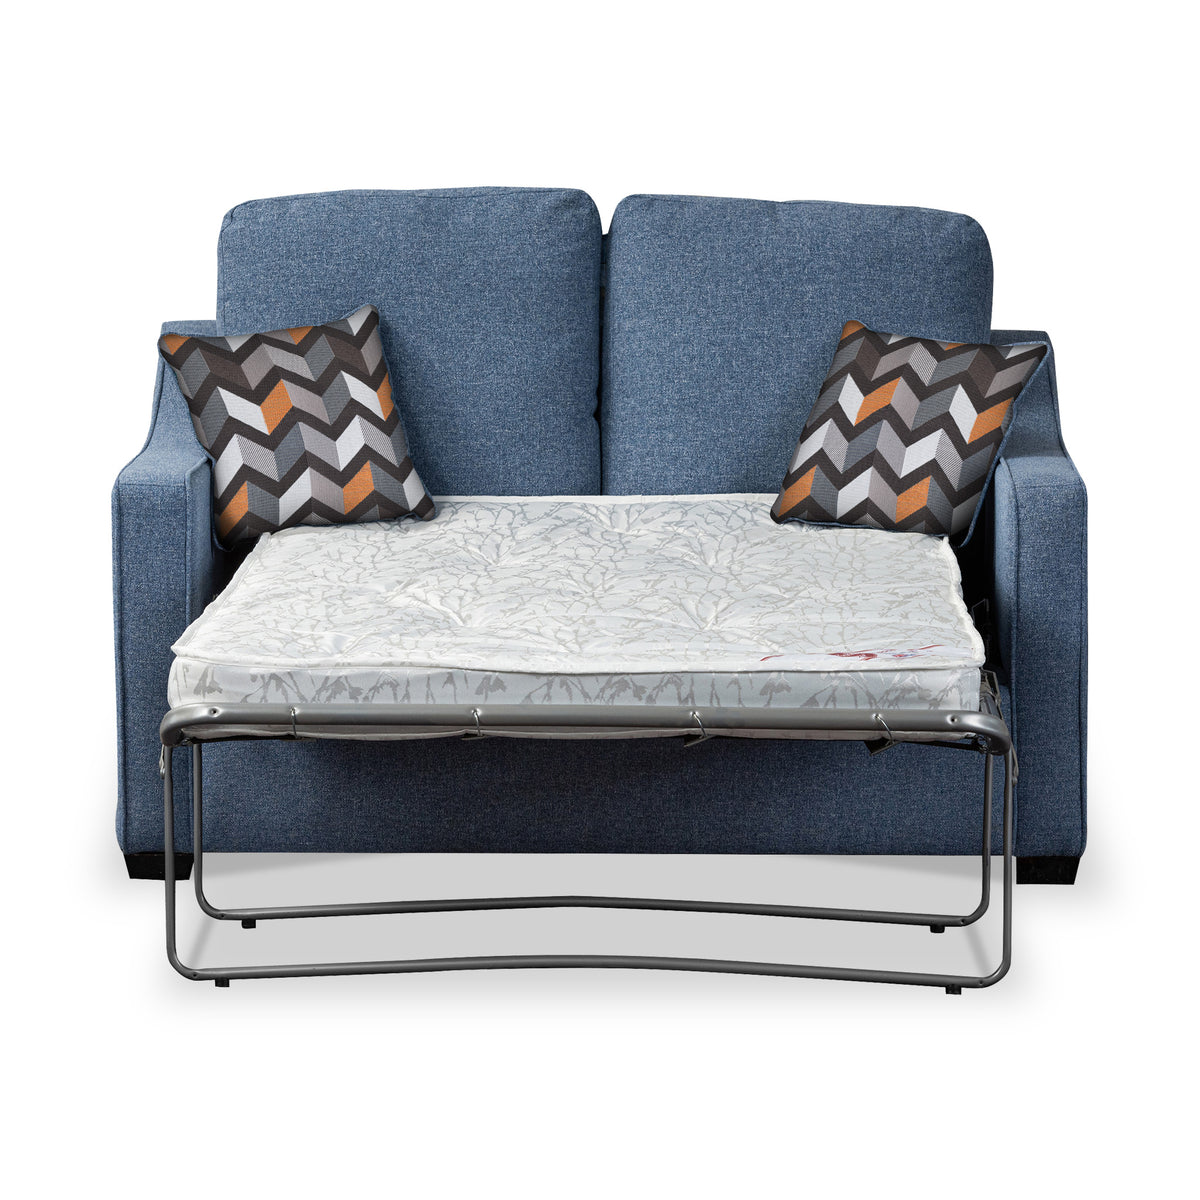 Charlcote Denim Faux Linen 2 Seater Sofabed with Charcoal Scatter Cushions from Roseland Furniture